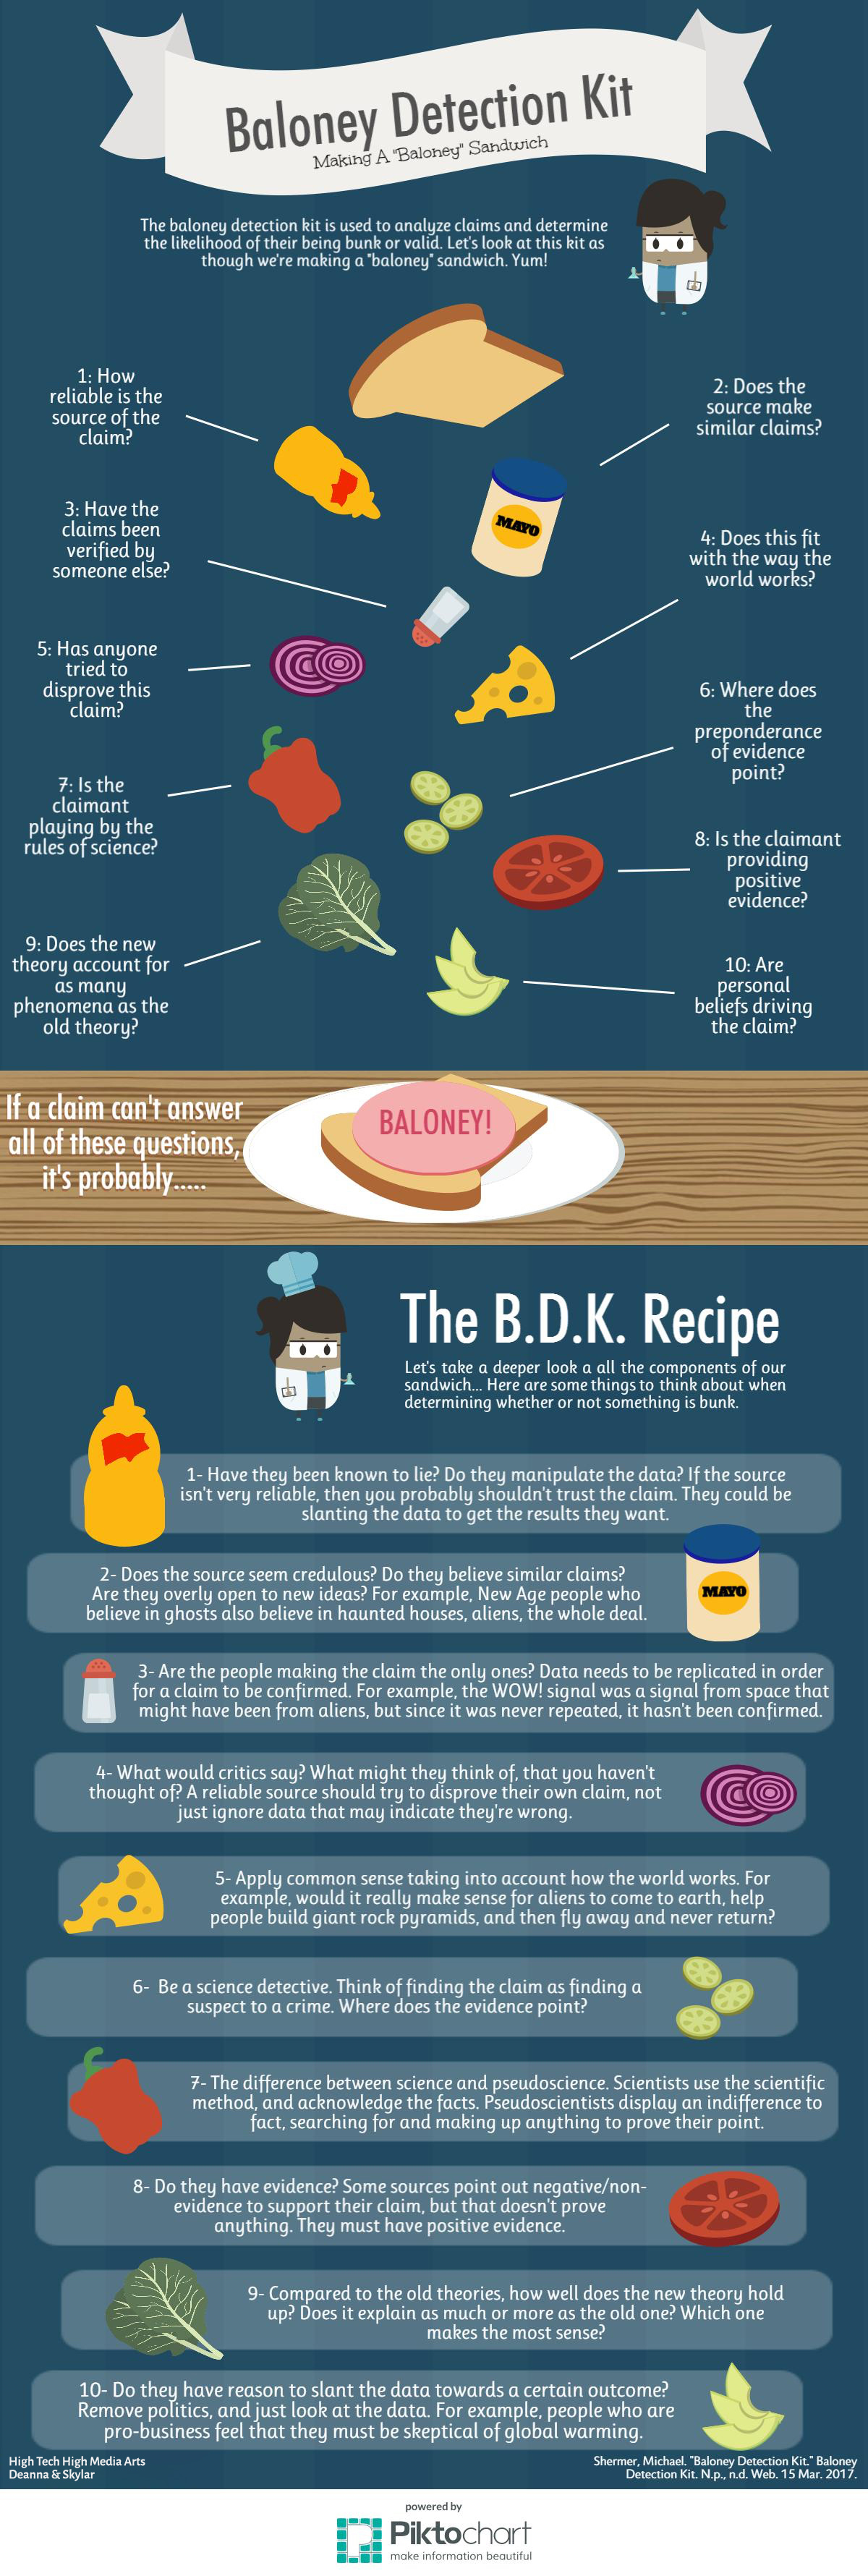 HS-Students-Baloney-Detection-Kit-Sandwich-Infographic